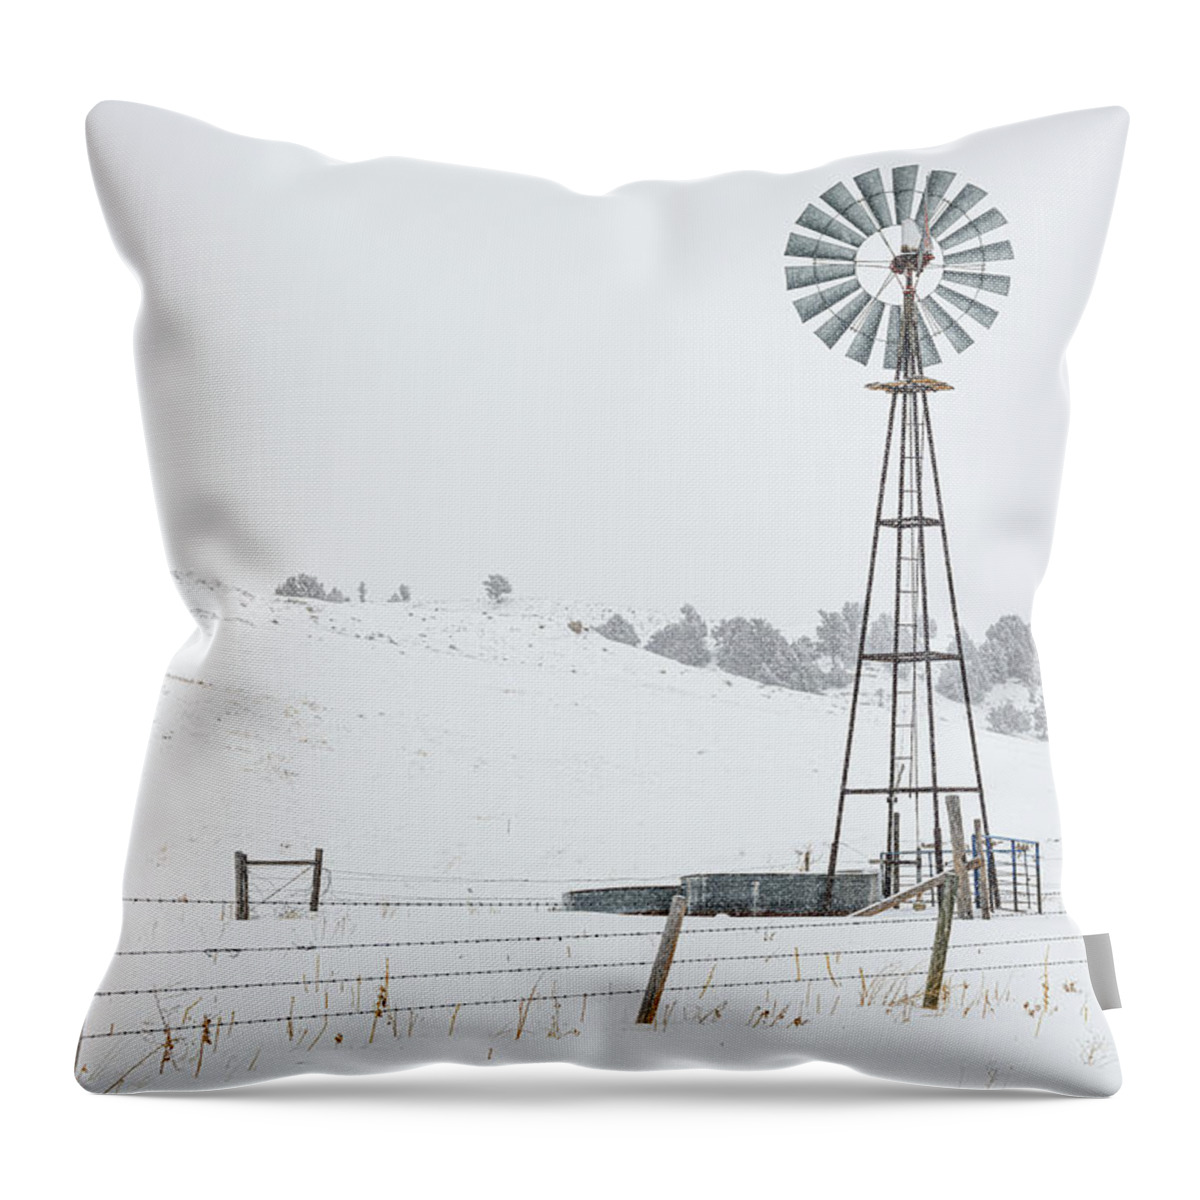 Windmill Throw Pillow featuring the photograph Winter Windmill by Darren White